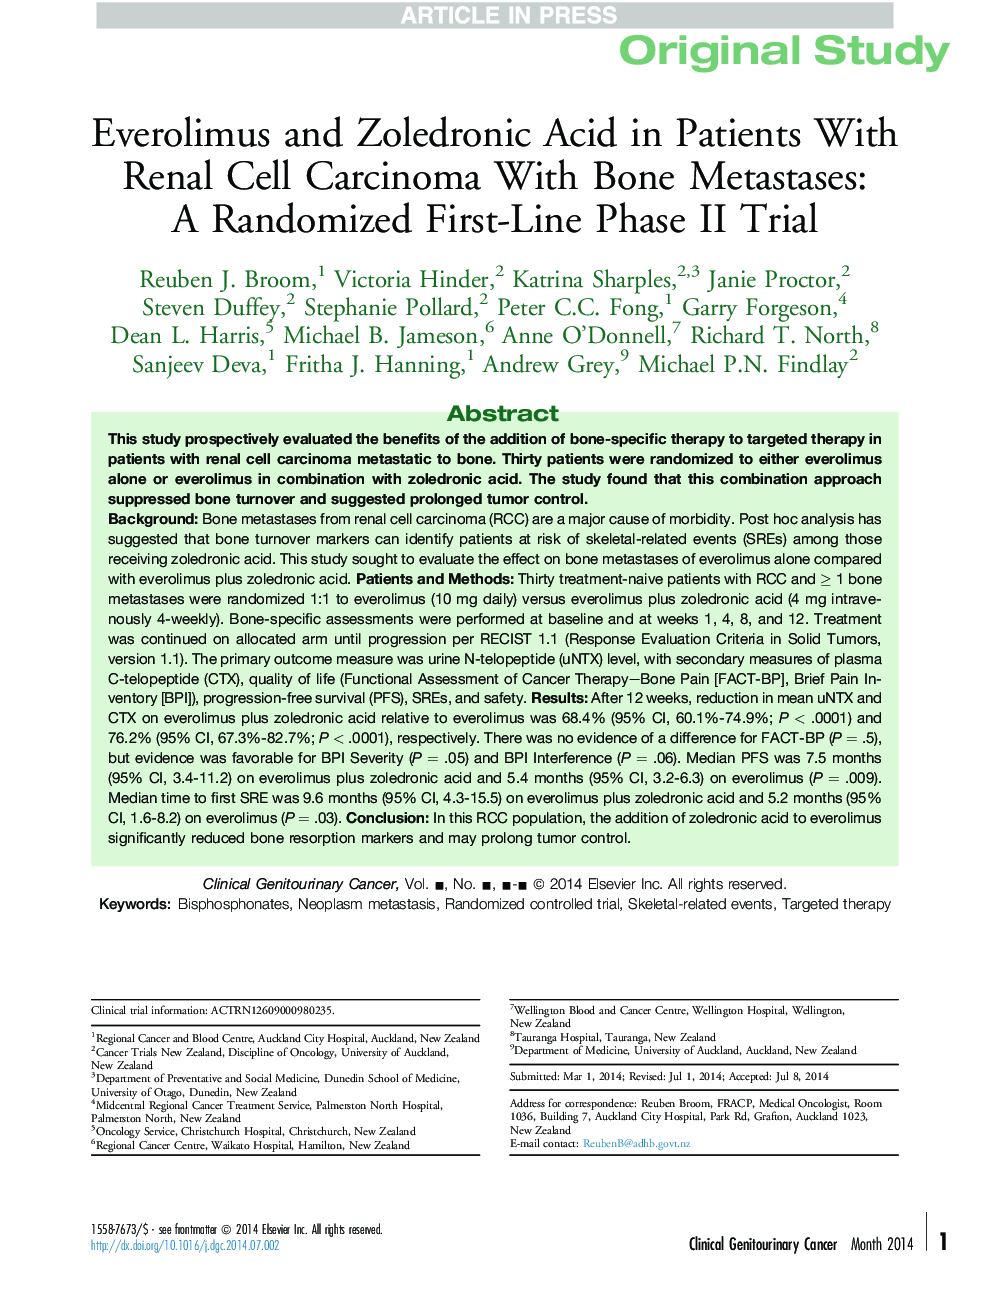 Everolimus and Zoledronic Acid in Patients With Renal Cell Carcinoma With Bone Metastases: AÂ Randomized First-Line Phase II Trial